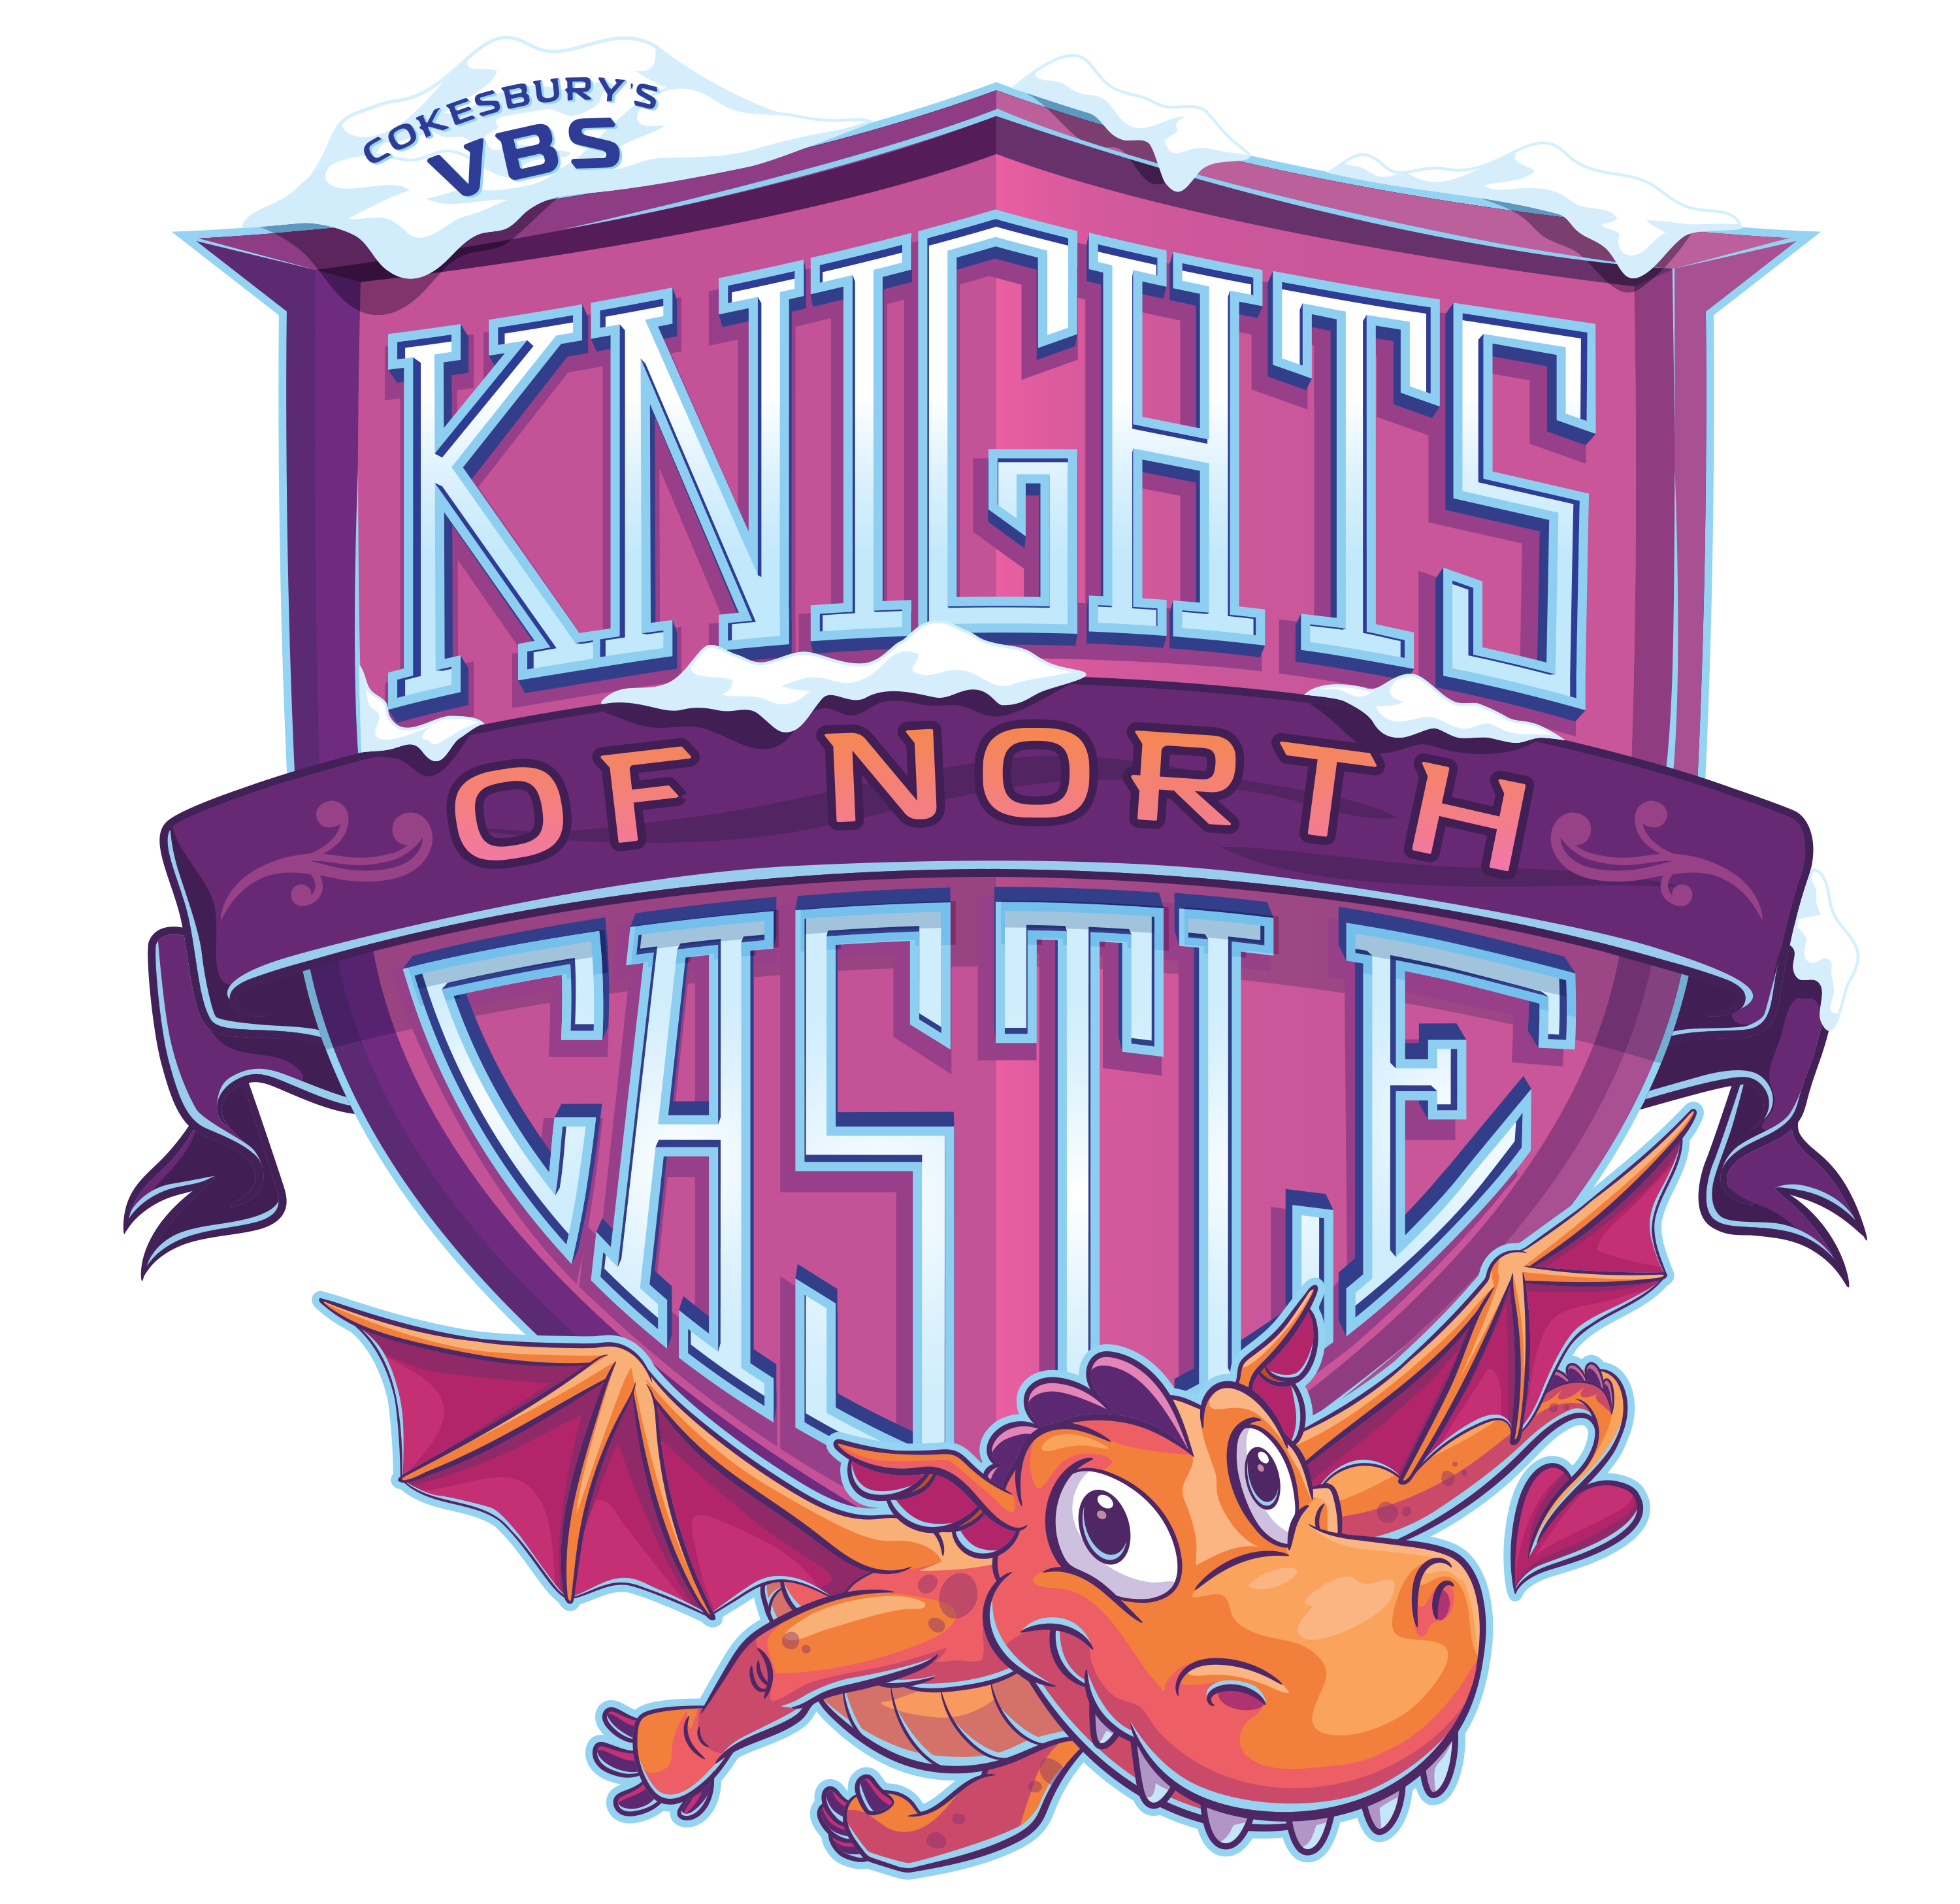 Knights of North Castle by Cokesbury